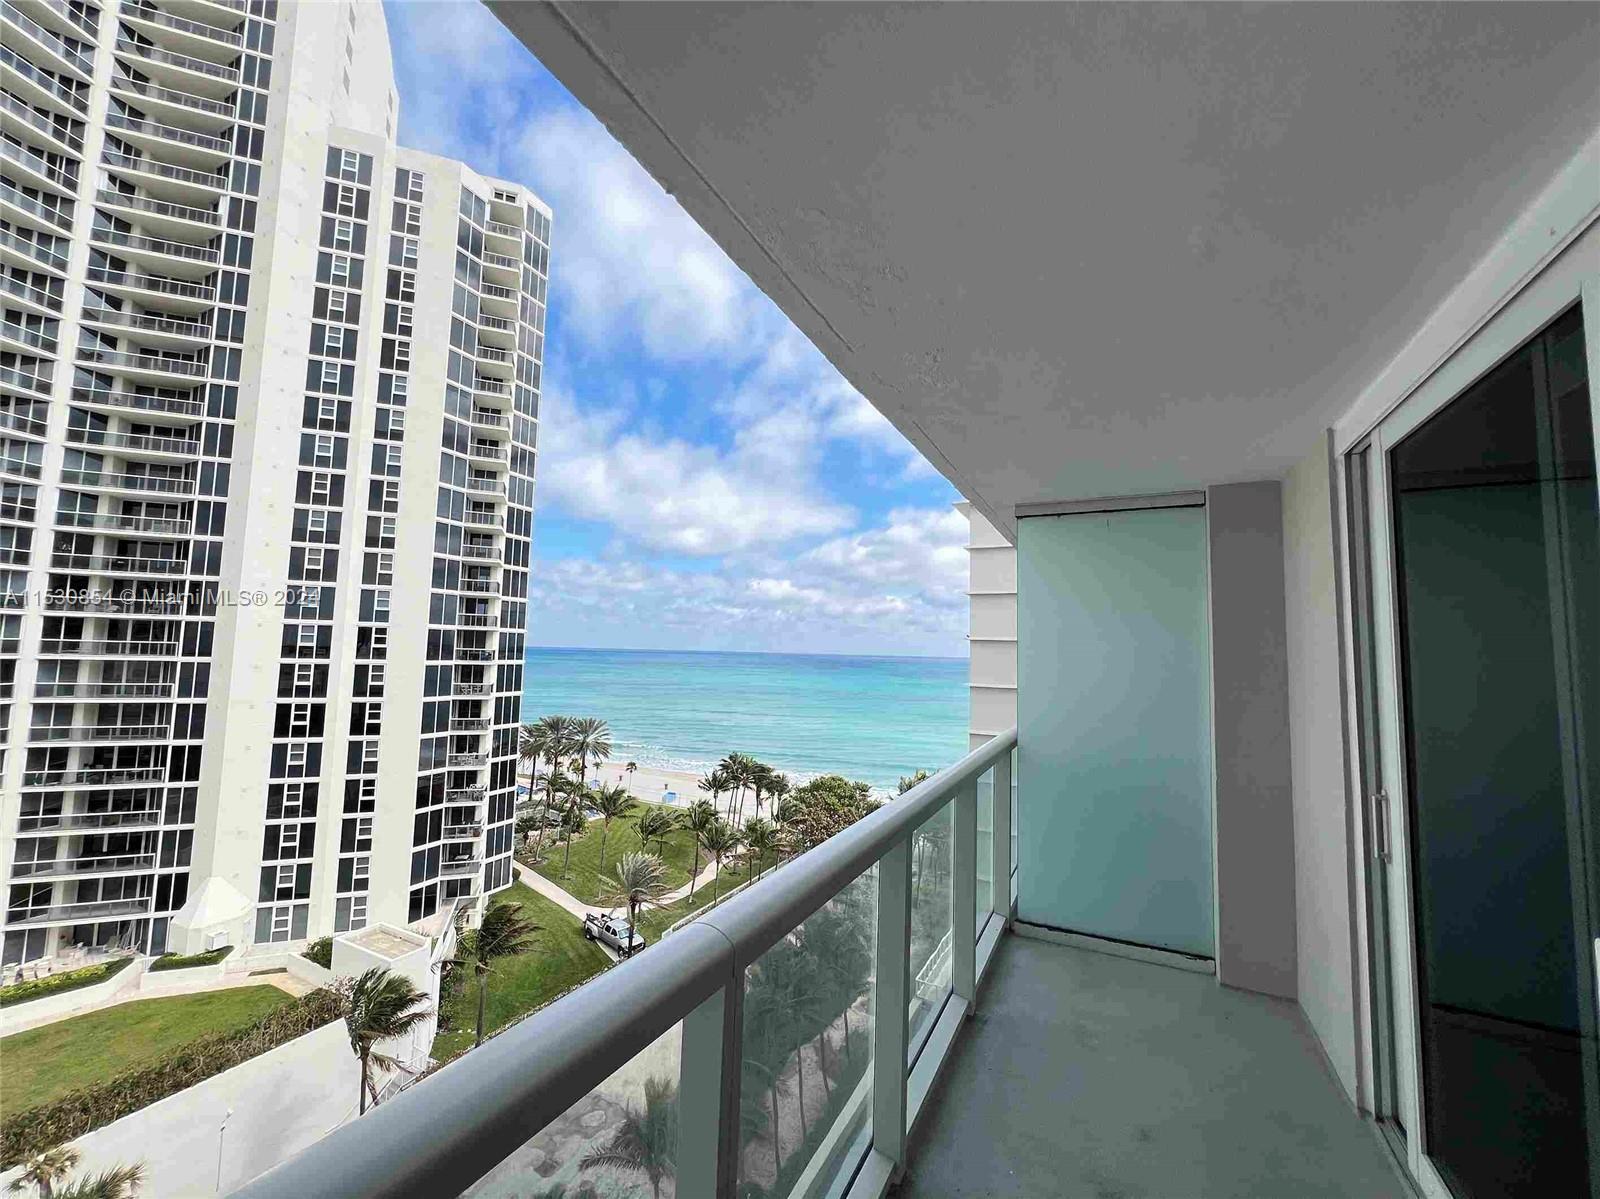 Excellent condition studio in Oceanside building of Sunny Isles with ocean view. One of the few unit